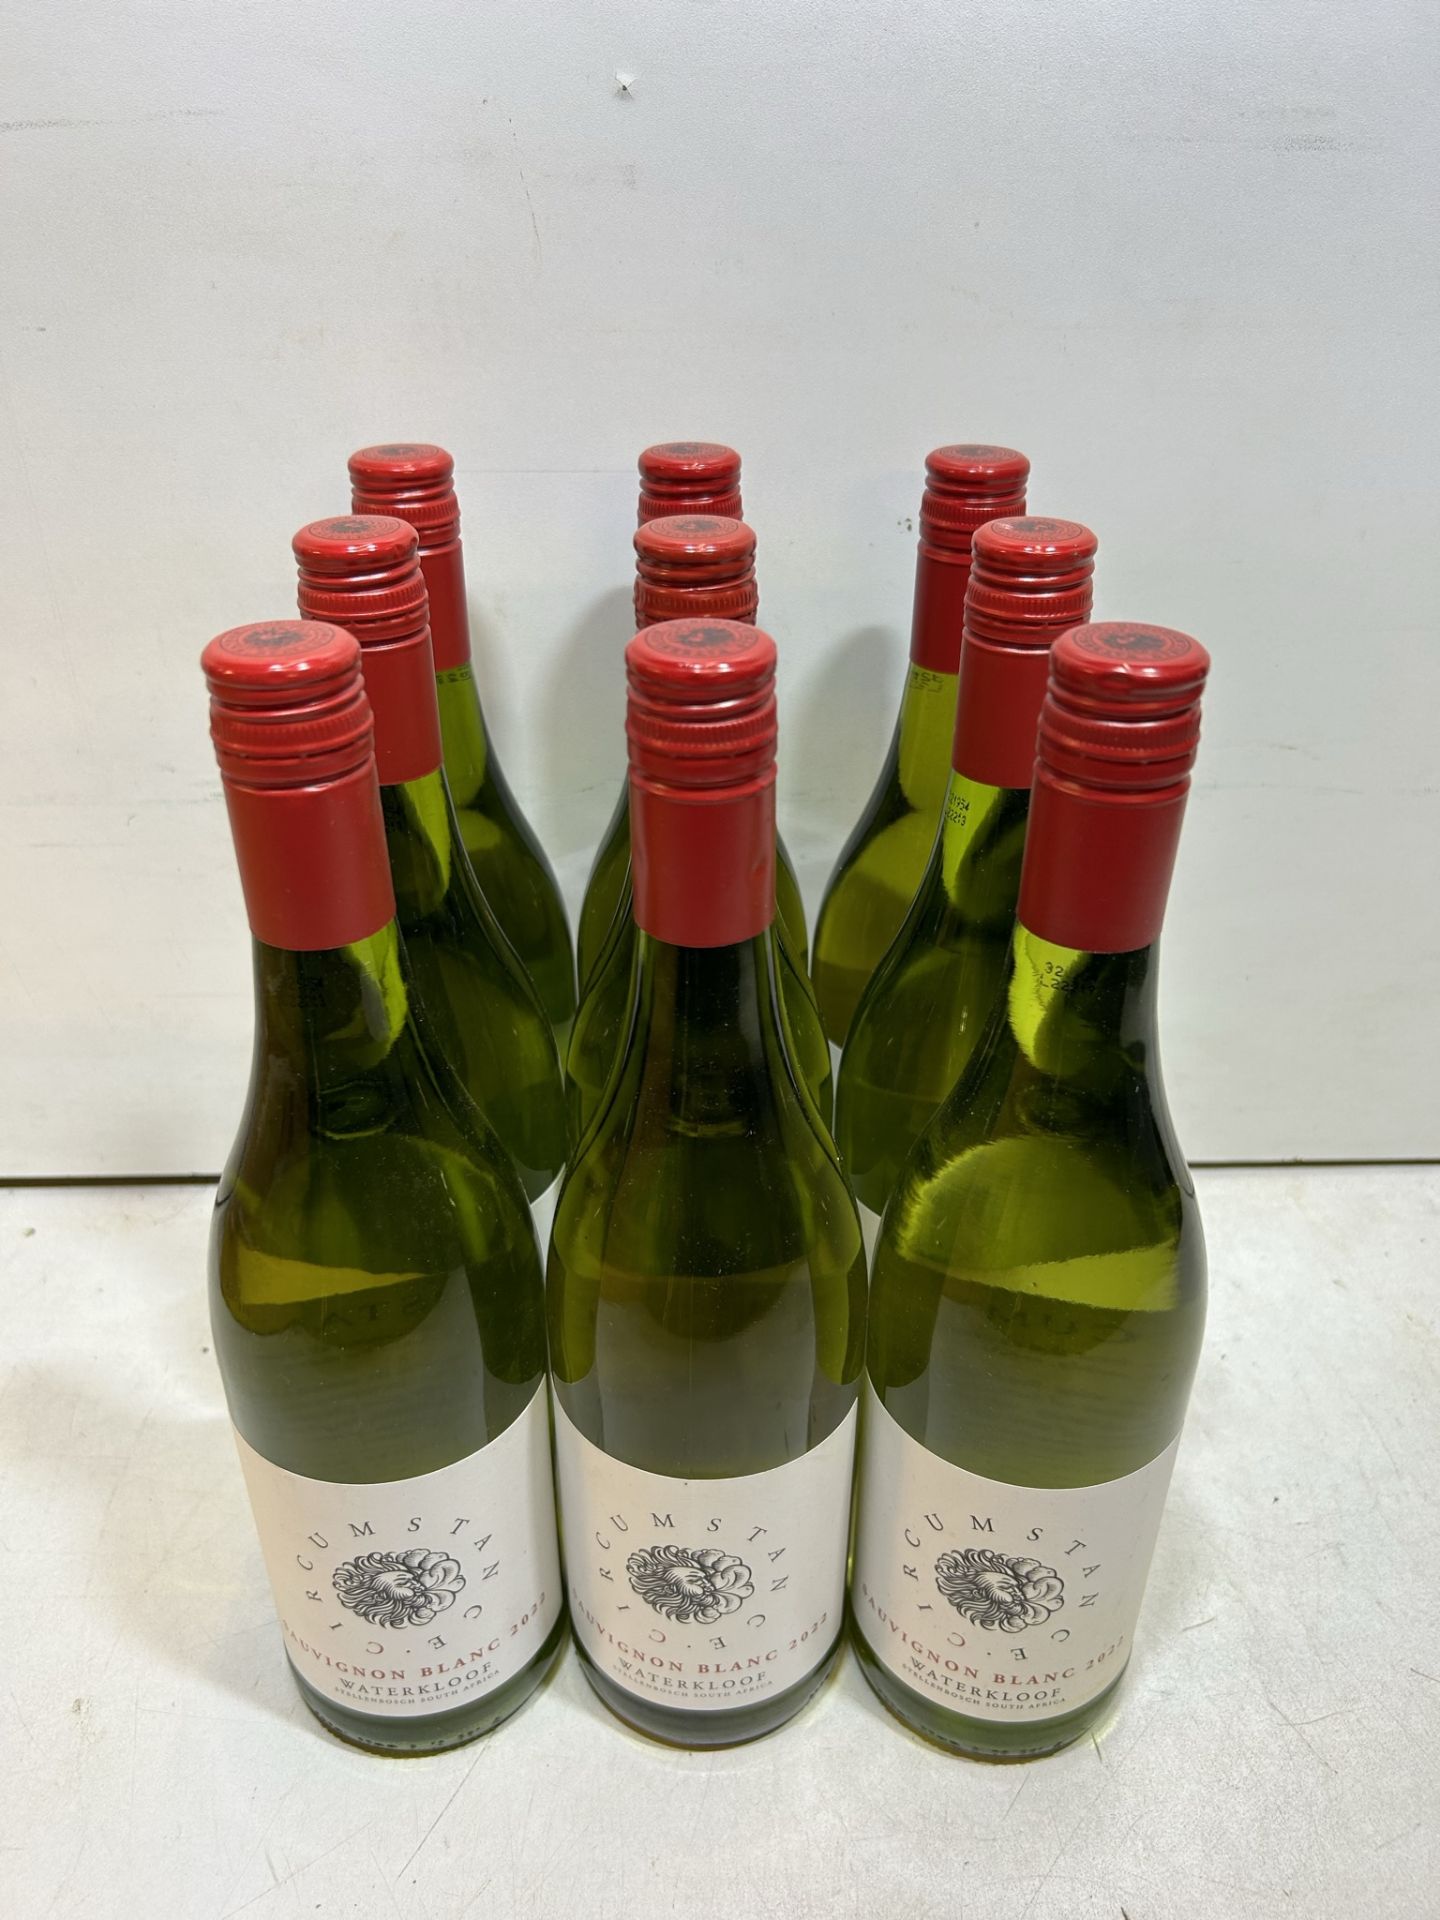 4 x Crates of Circumstance Sauvignon Blanc White Wine & 9 x Loose Bottles (33 x Bottles in total) - Image 5 of 5